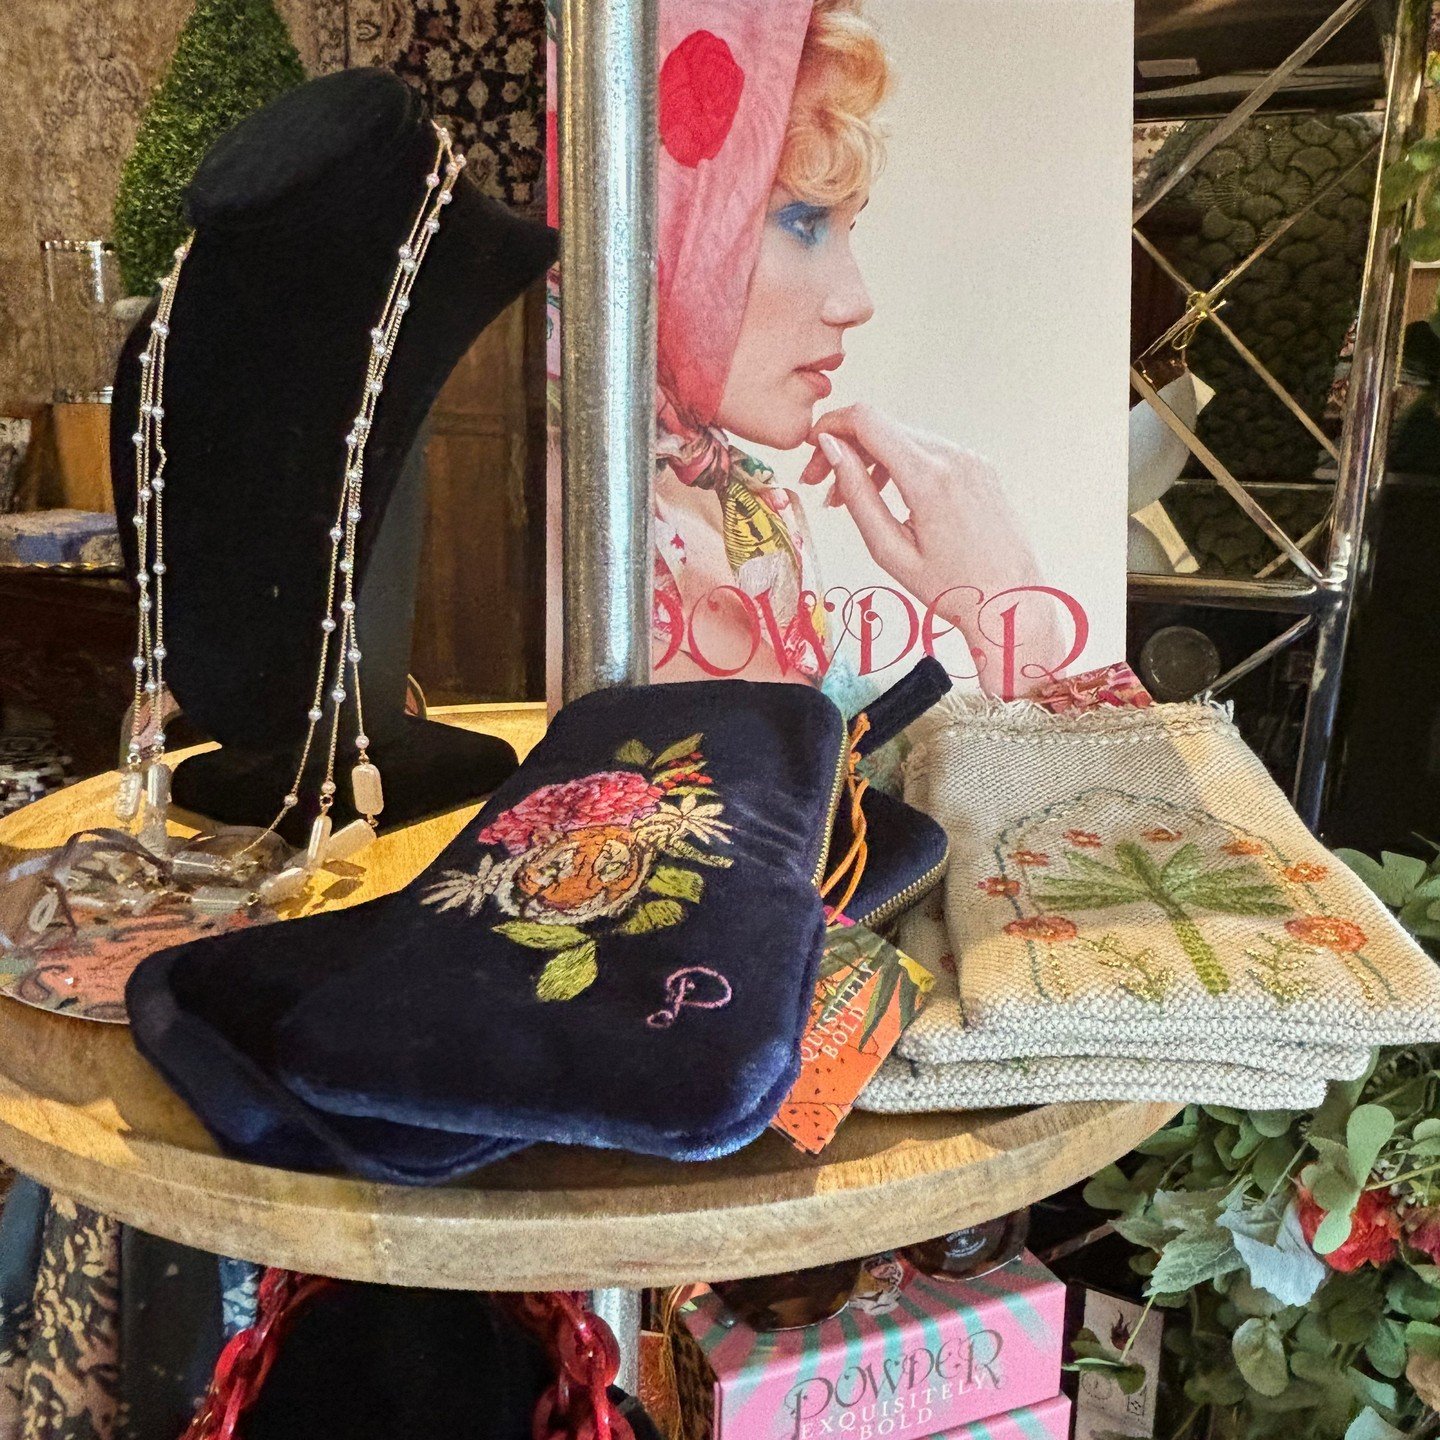 These beautiful sunglasses, scarves &amp; accessories are perfect gifts for Mom! Mother's Day is May 12th. #studioferro #visitmorris #shopmorris #interiordesign #floraldesign #uniquegifts